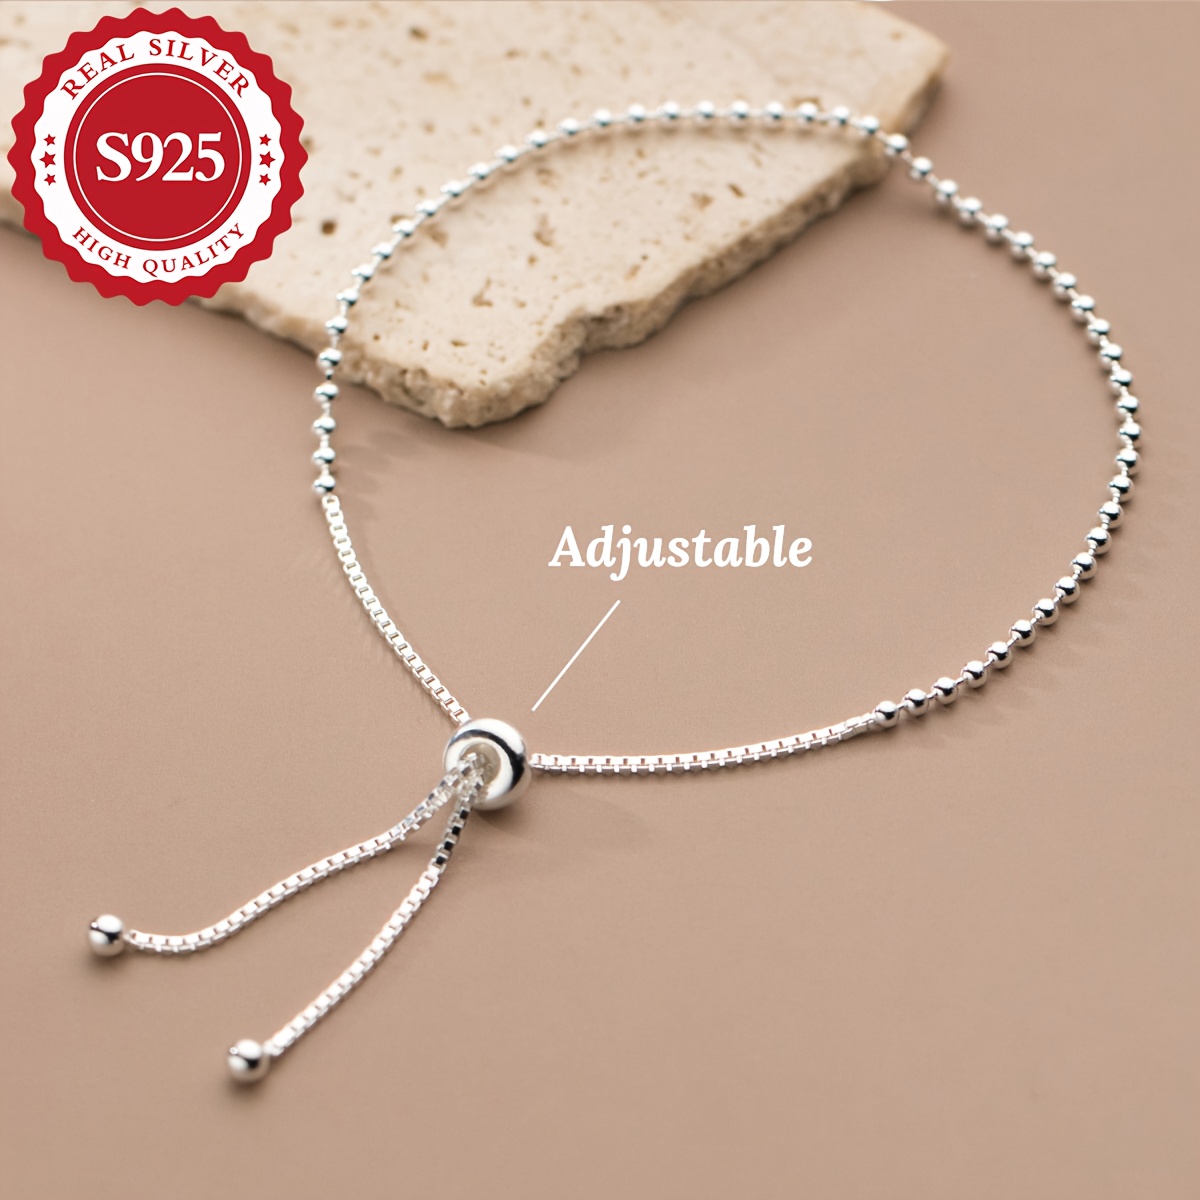 

Adjustable 925 Sterling Silver Ladies Beaded Bracelet, Simple Fashion Daily Wear, Cute Minimalist Style For Matching Outfits